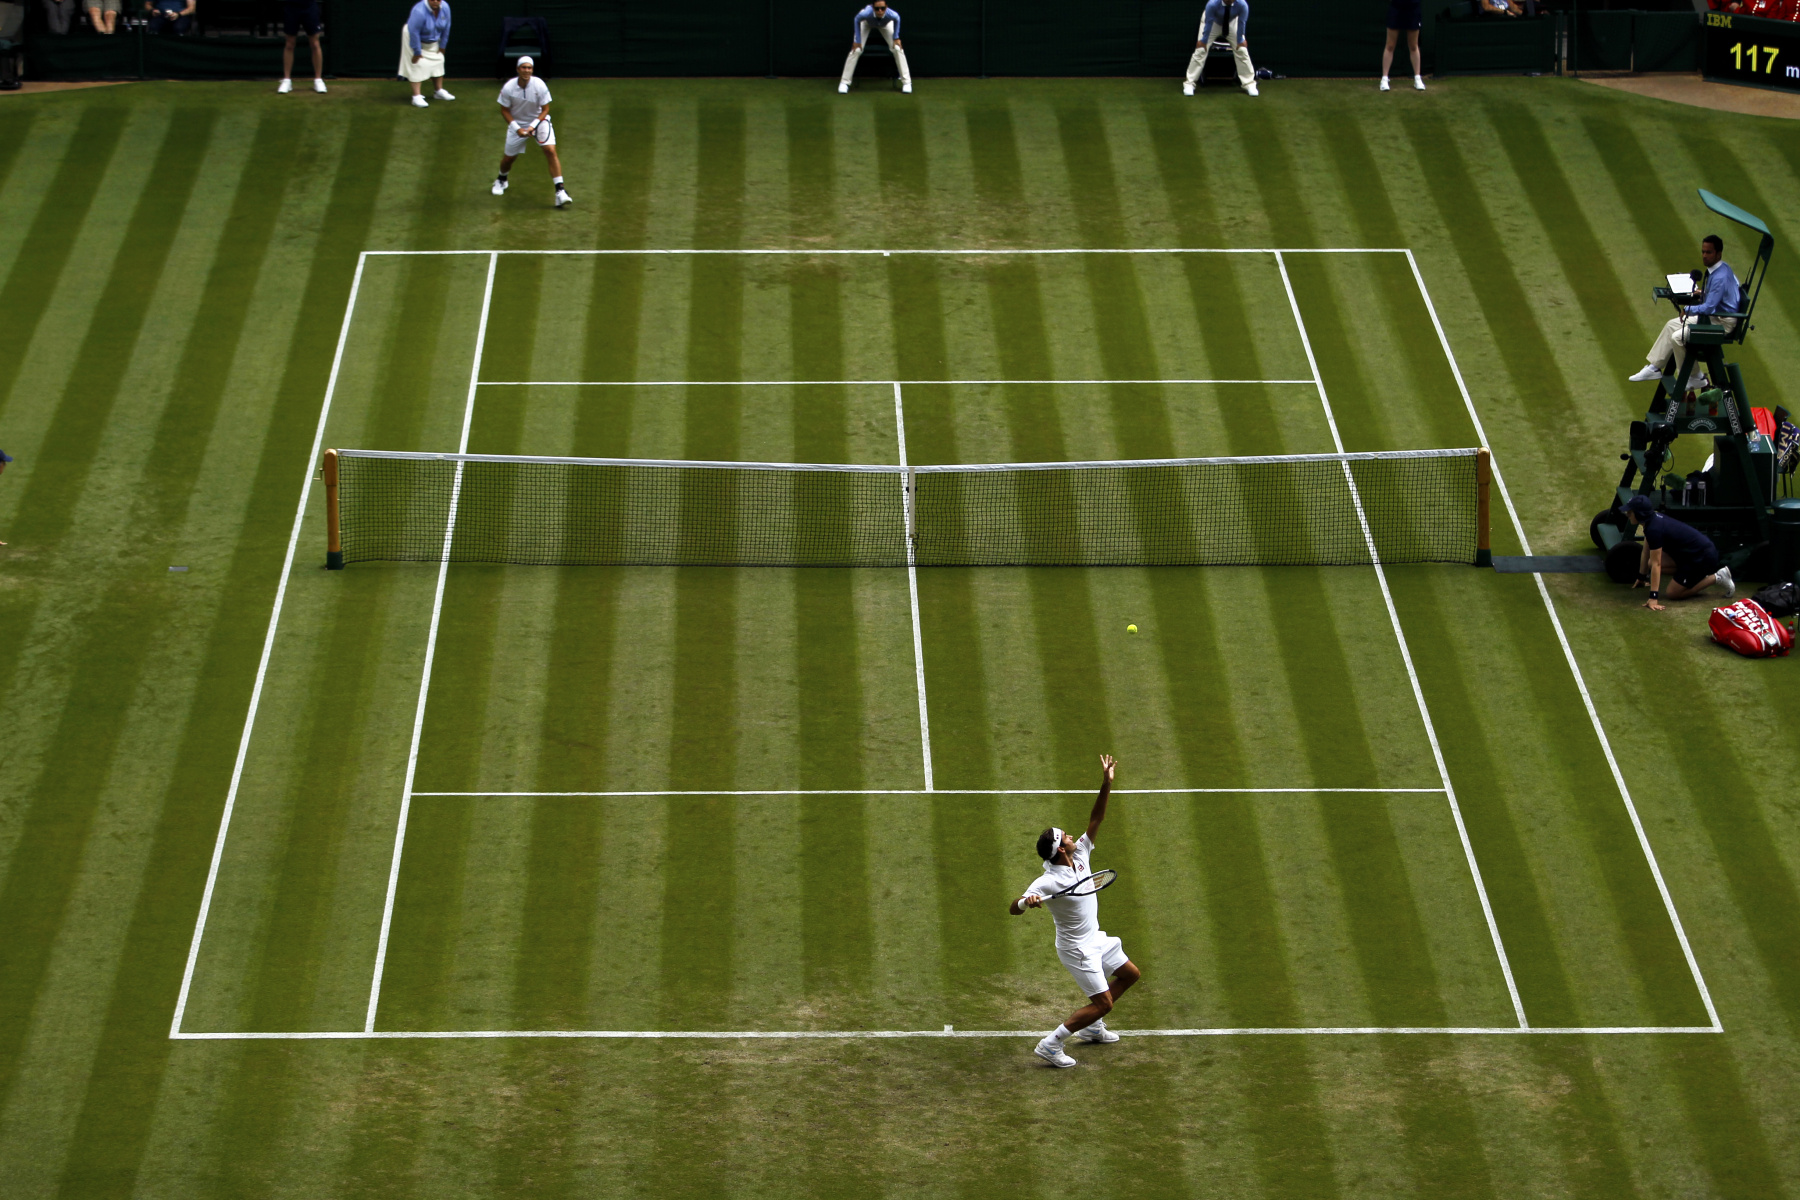 <h4 style="text-transform:uppercase">Roger Federer on Centre Court at Wimbledon</h4>
<div class="captiontext">
The pristine lawn of Centre Court at Wimbledon through most of the 2000's has felt like Roger Federer's home.  His presence when on this most hallowed ground, can be felt like an aura and a force when he sets foot there, and his eight Wimbledon titles still the most by any male player.  Here he serves on this legendary court in 2018.
</div>




 : Tennis : Photography by Adam Stoltman: Sports Photography, The Arts, Portraiture, Travel, Photojournalism and Fine Art in New York